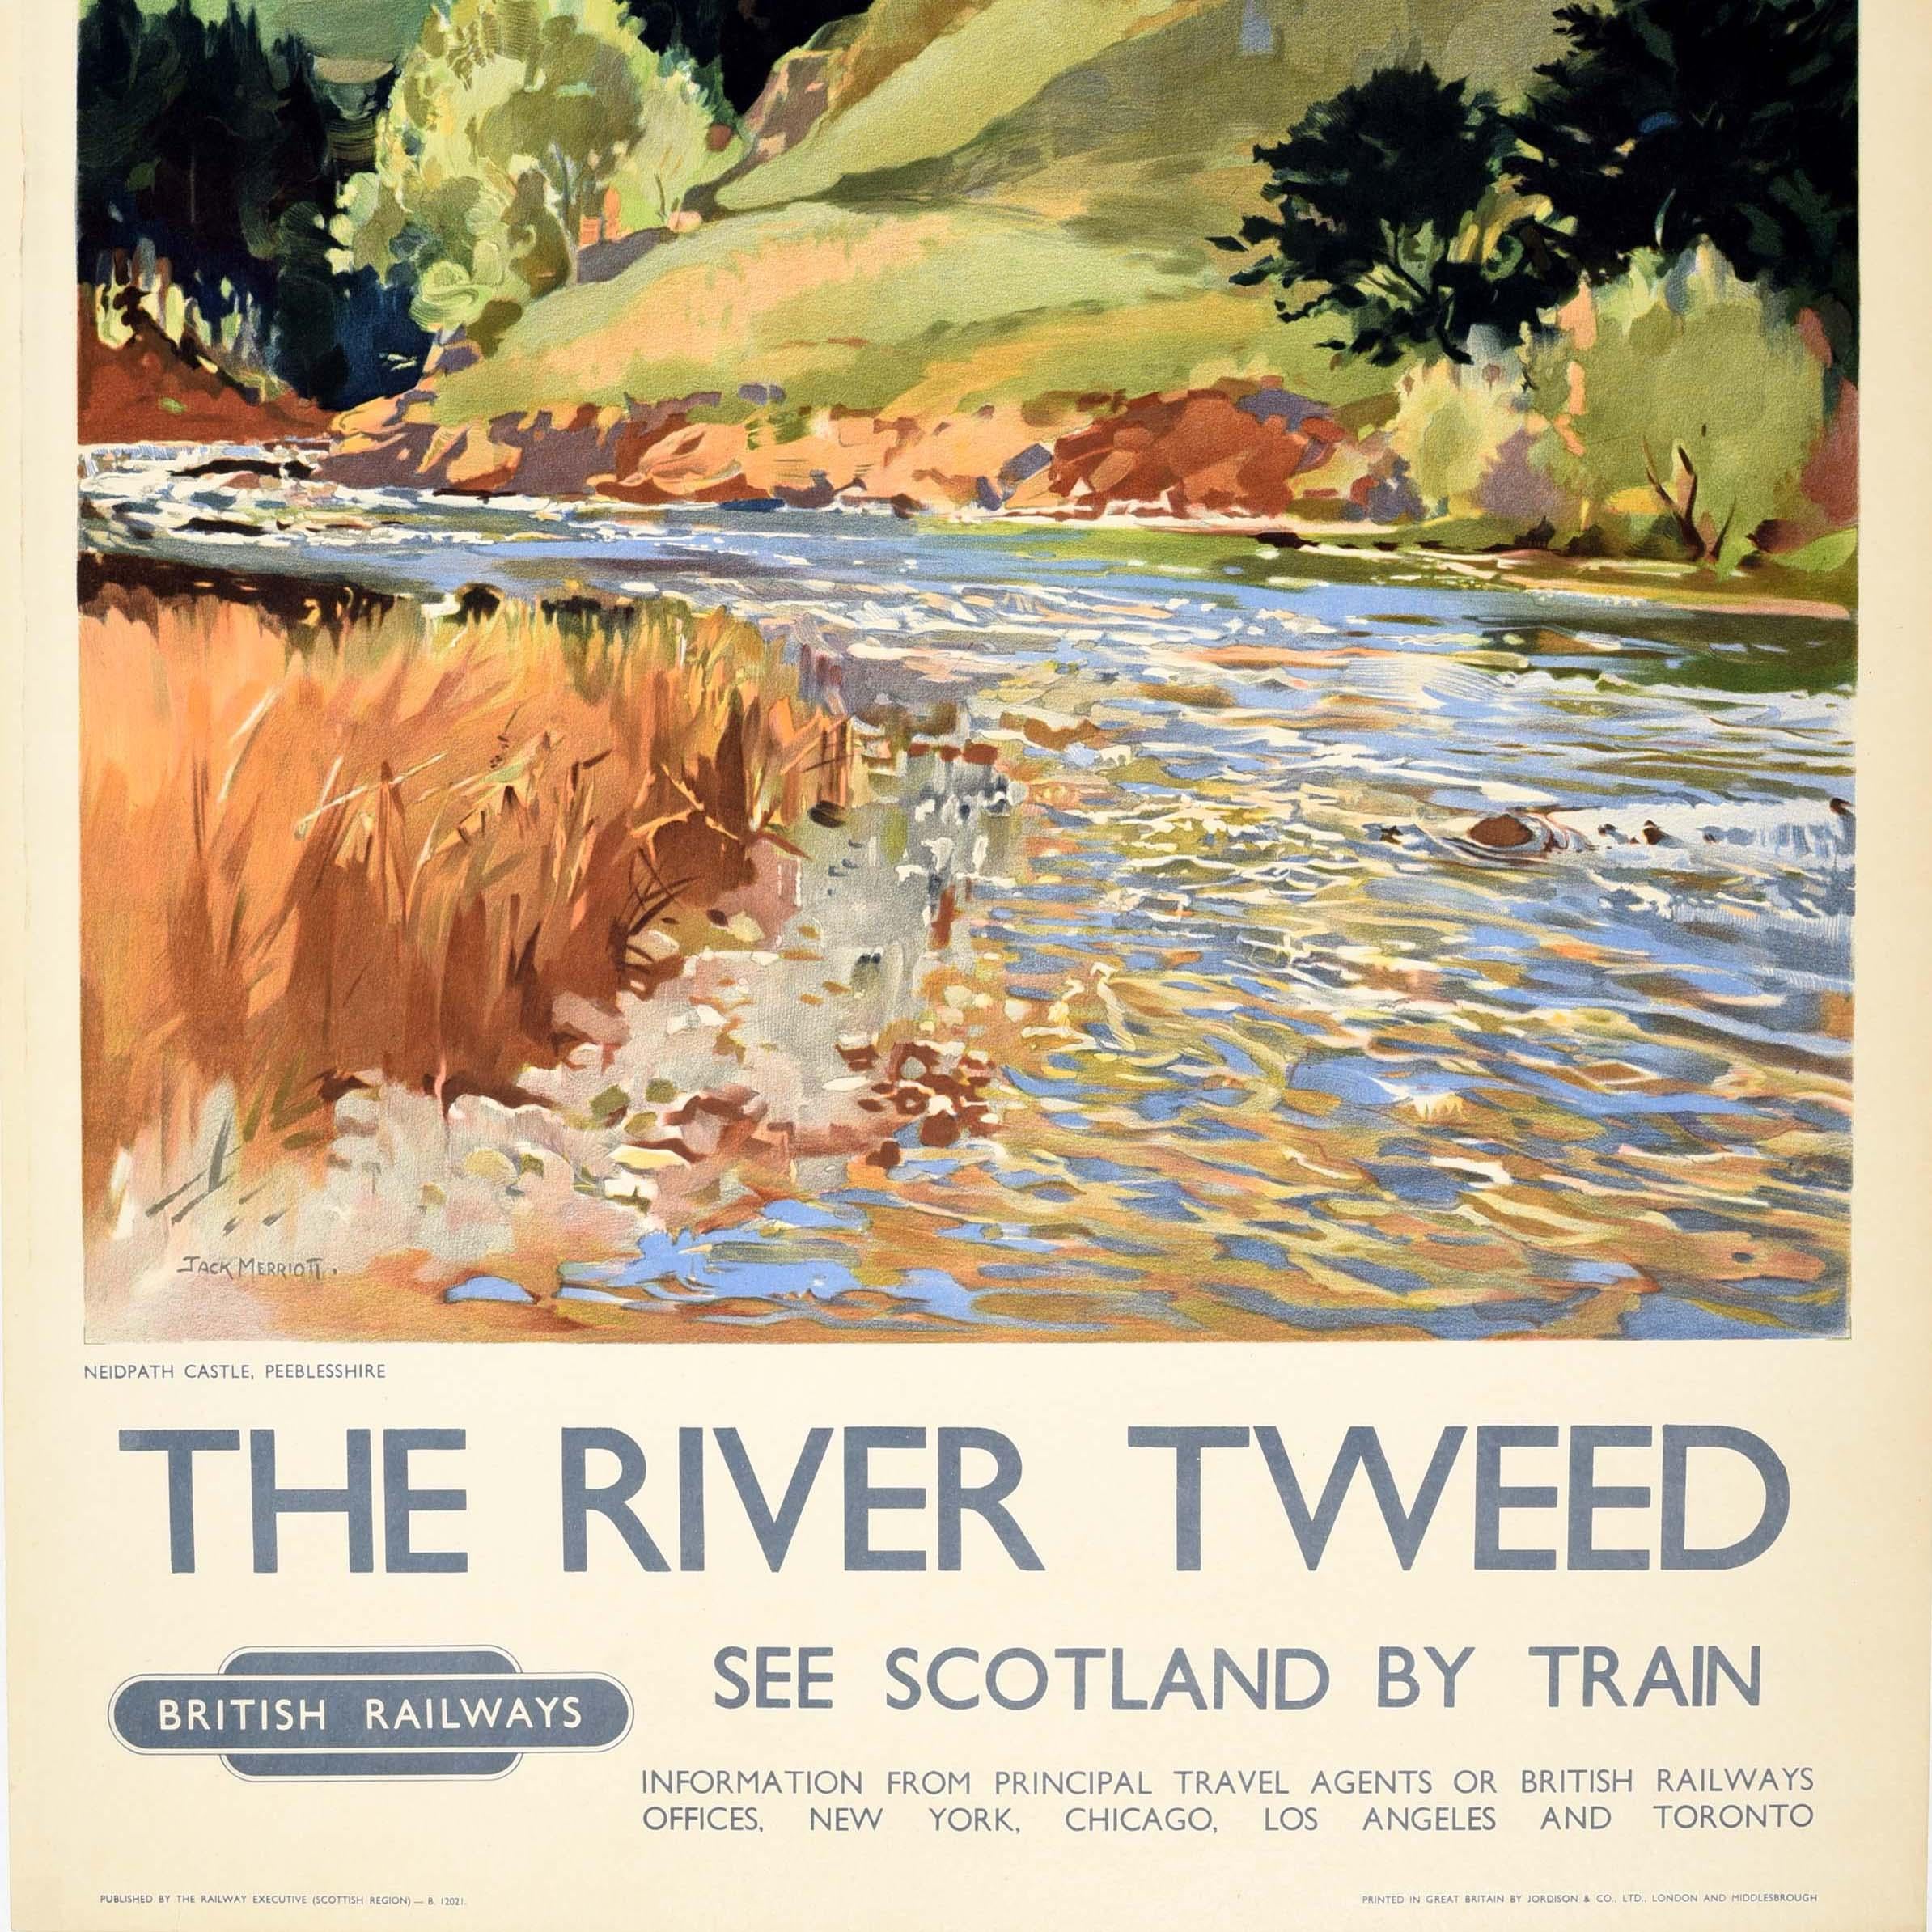 Original vintage travel poster issued by British Railways - The River Tweed See Scotland by Train - featuring a painting by the British artist Jack Merriott (1901-1968) depicting a scenic view of the historic tower house Neidpath Castle in